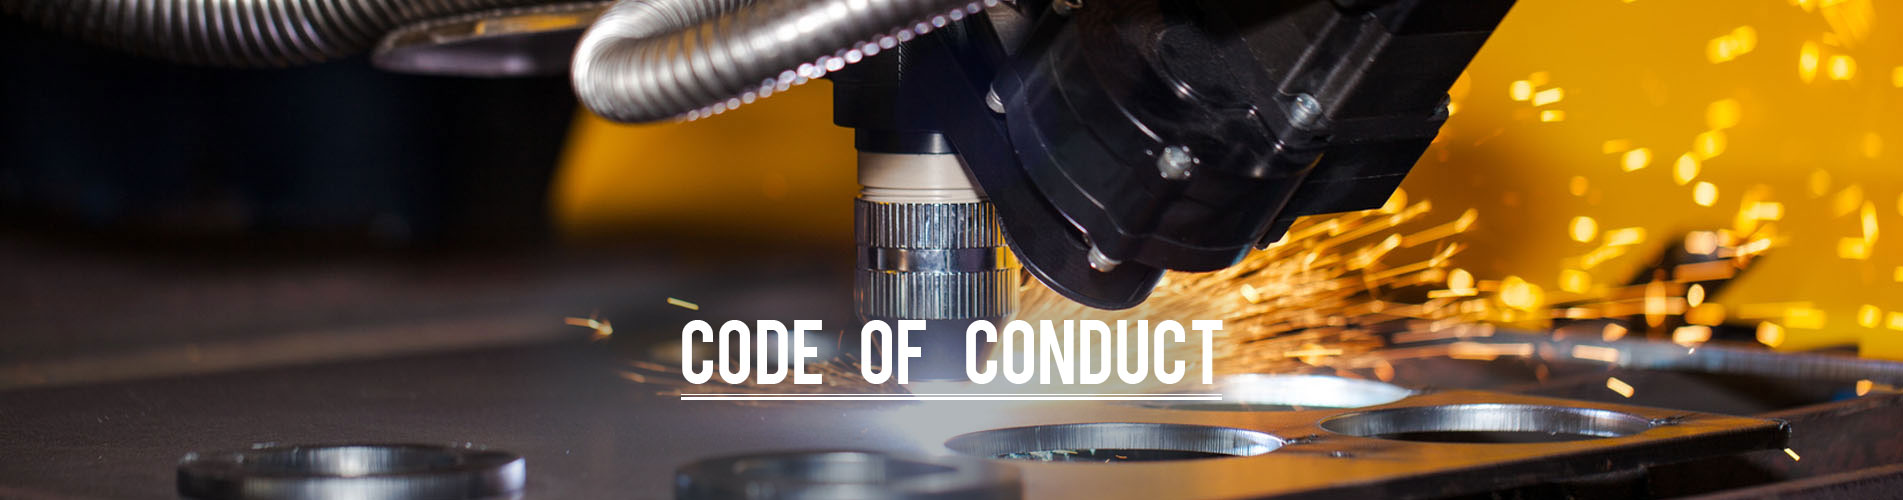 code of conduct banner